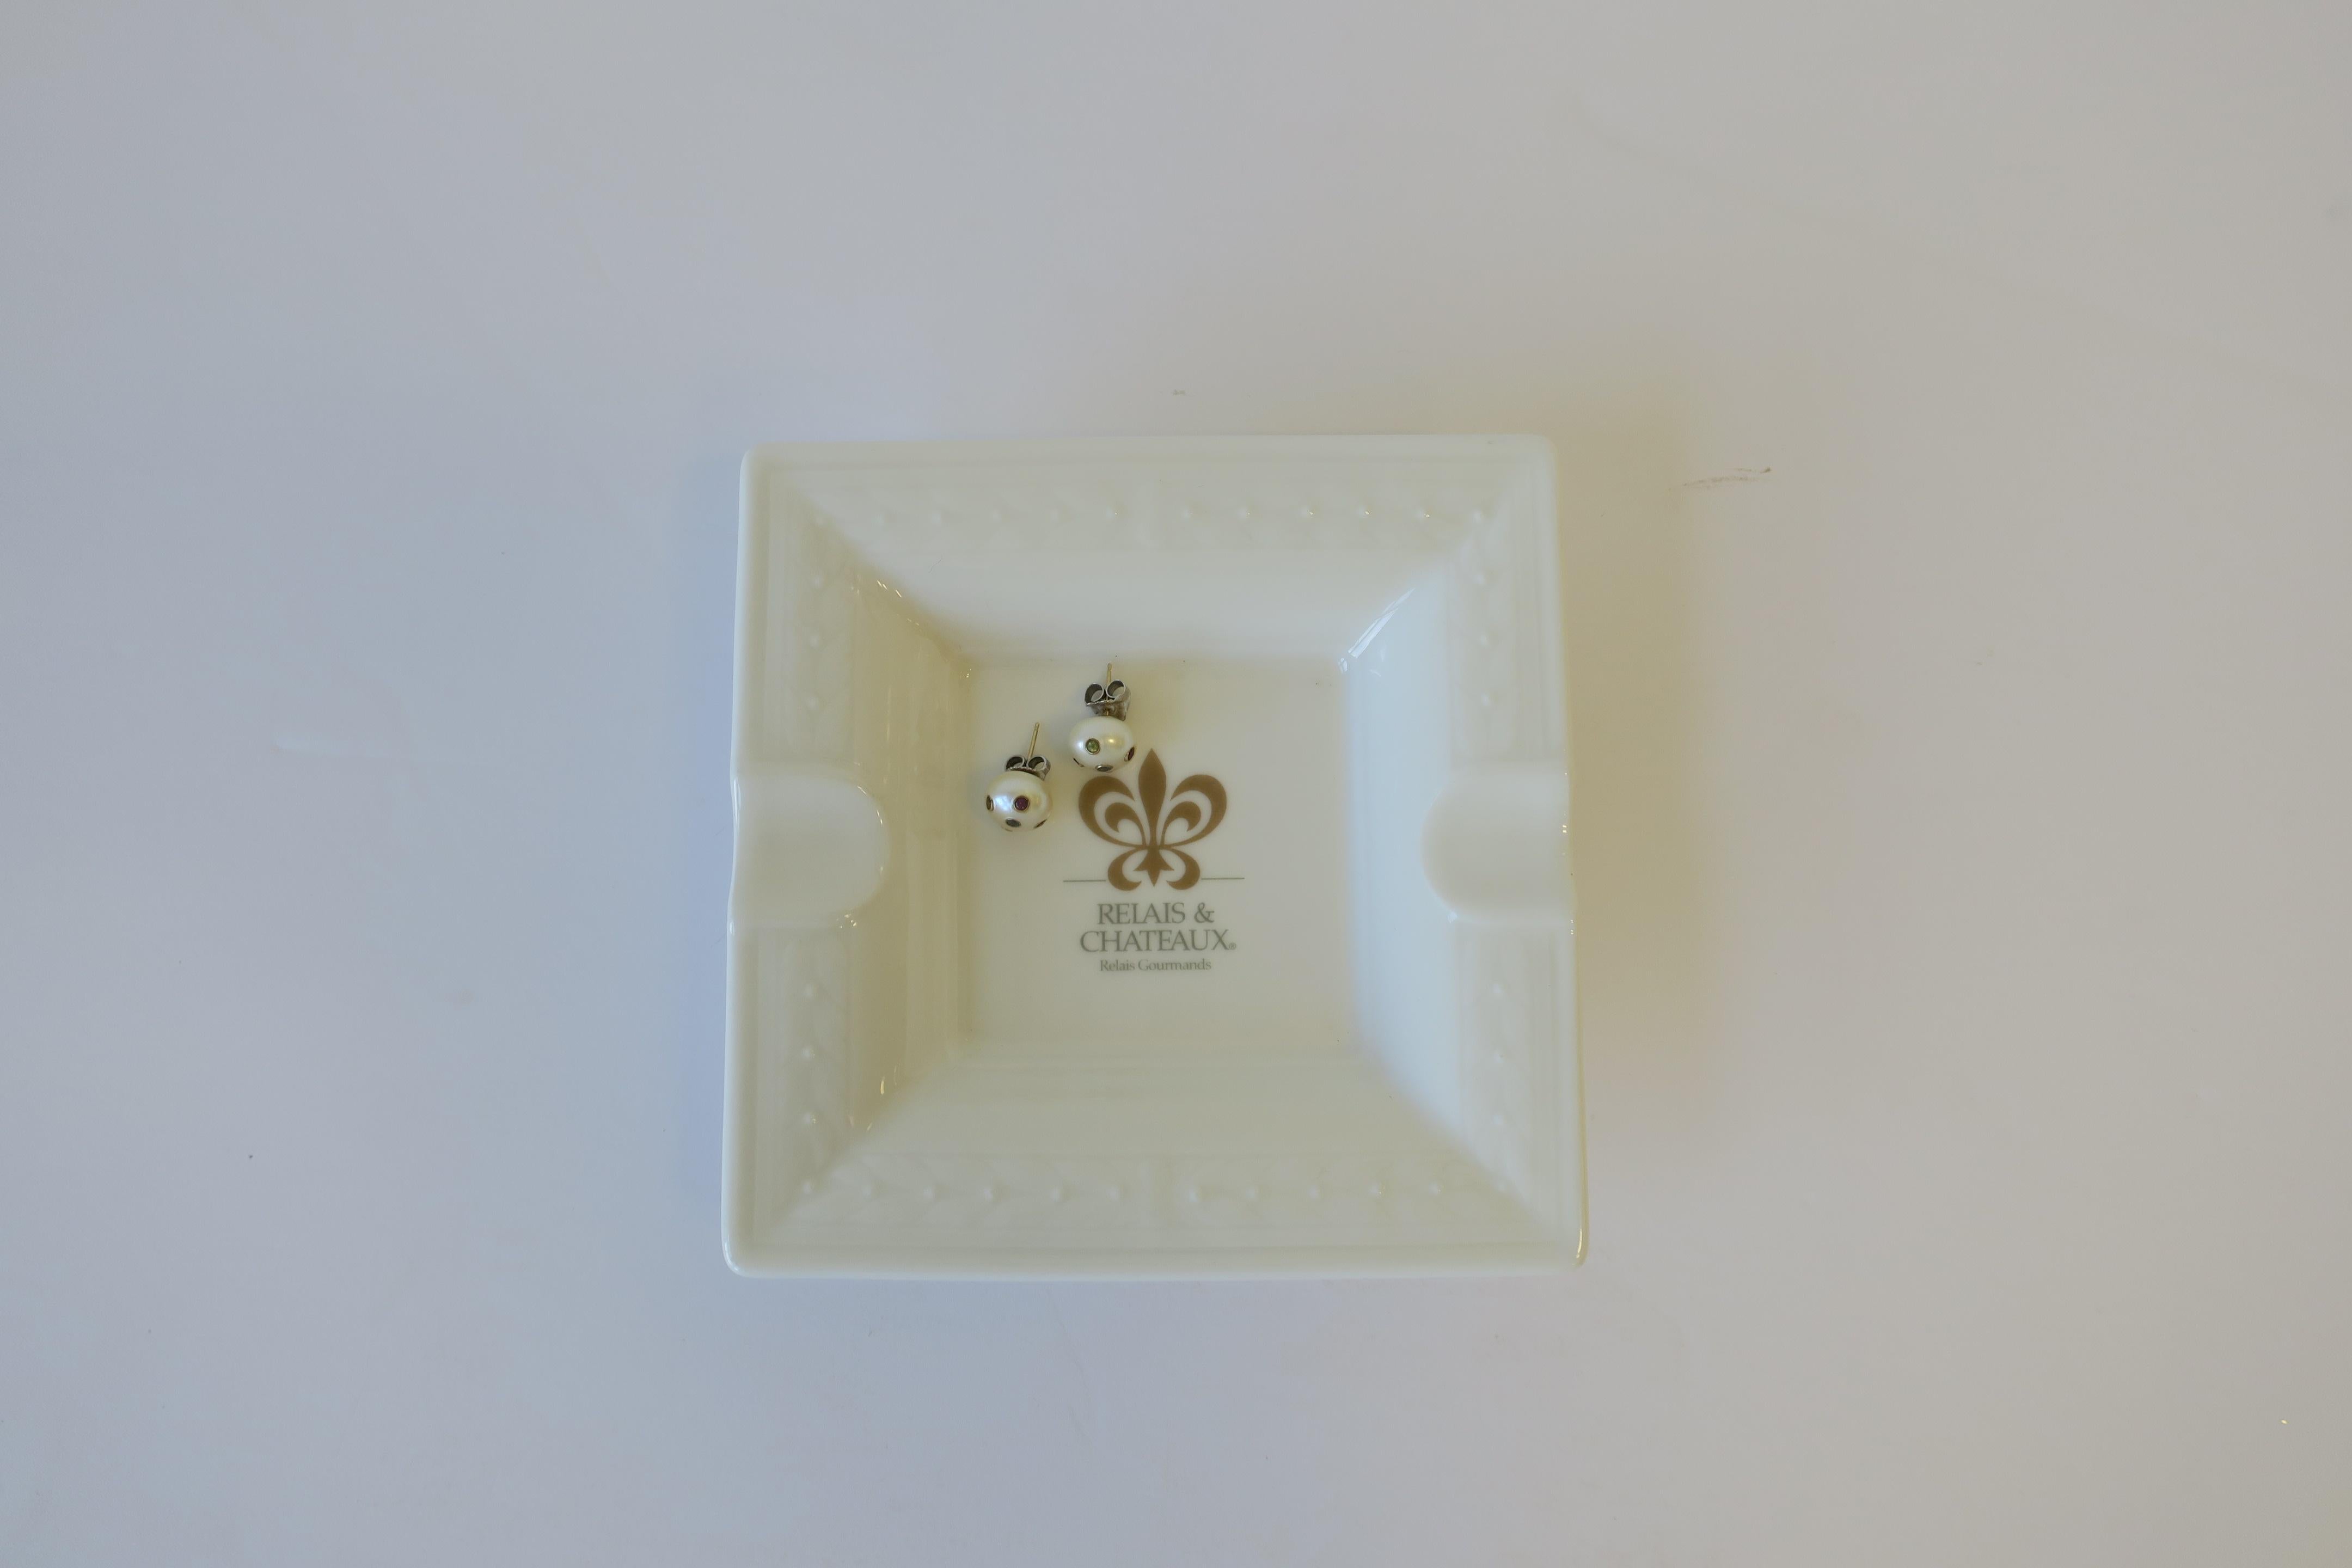 A small square white and gold porcelain dish or ashtray from French luxury hotel brand Chateau & Relias with a beautiful decorative gold fleur-de-lis. With maker's mark on back as shown in image #2. Made by Villroy & Bach, Luxemburg. This small dish